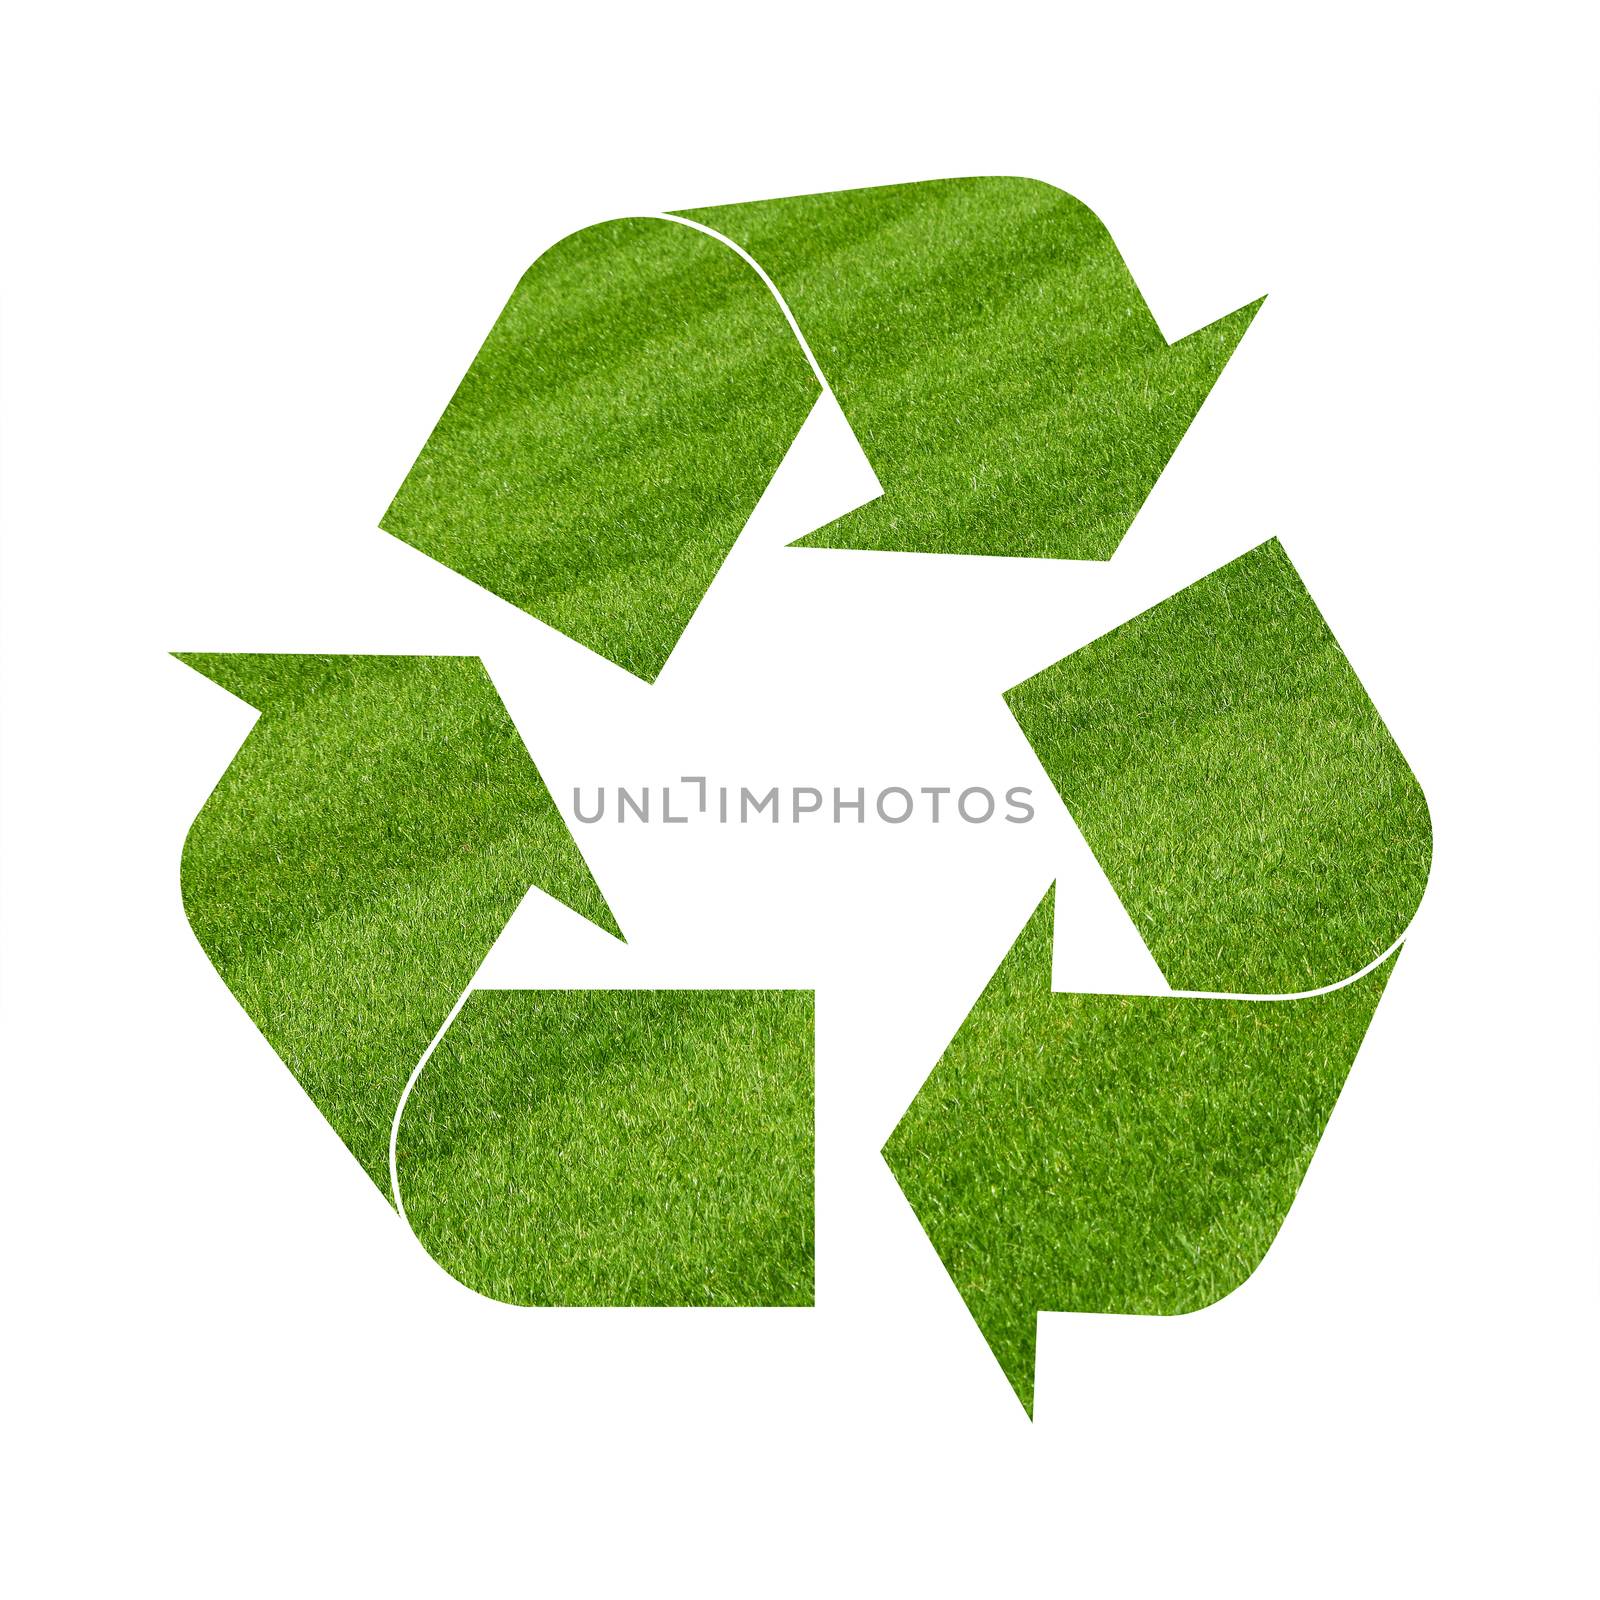 Illustration recycling symbol of green grass by BreakingTheWalls